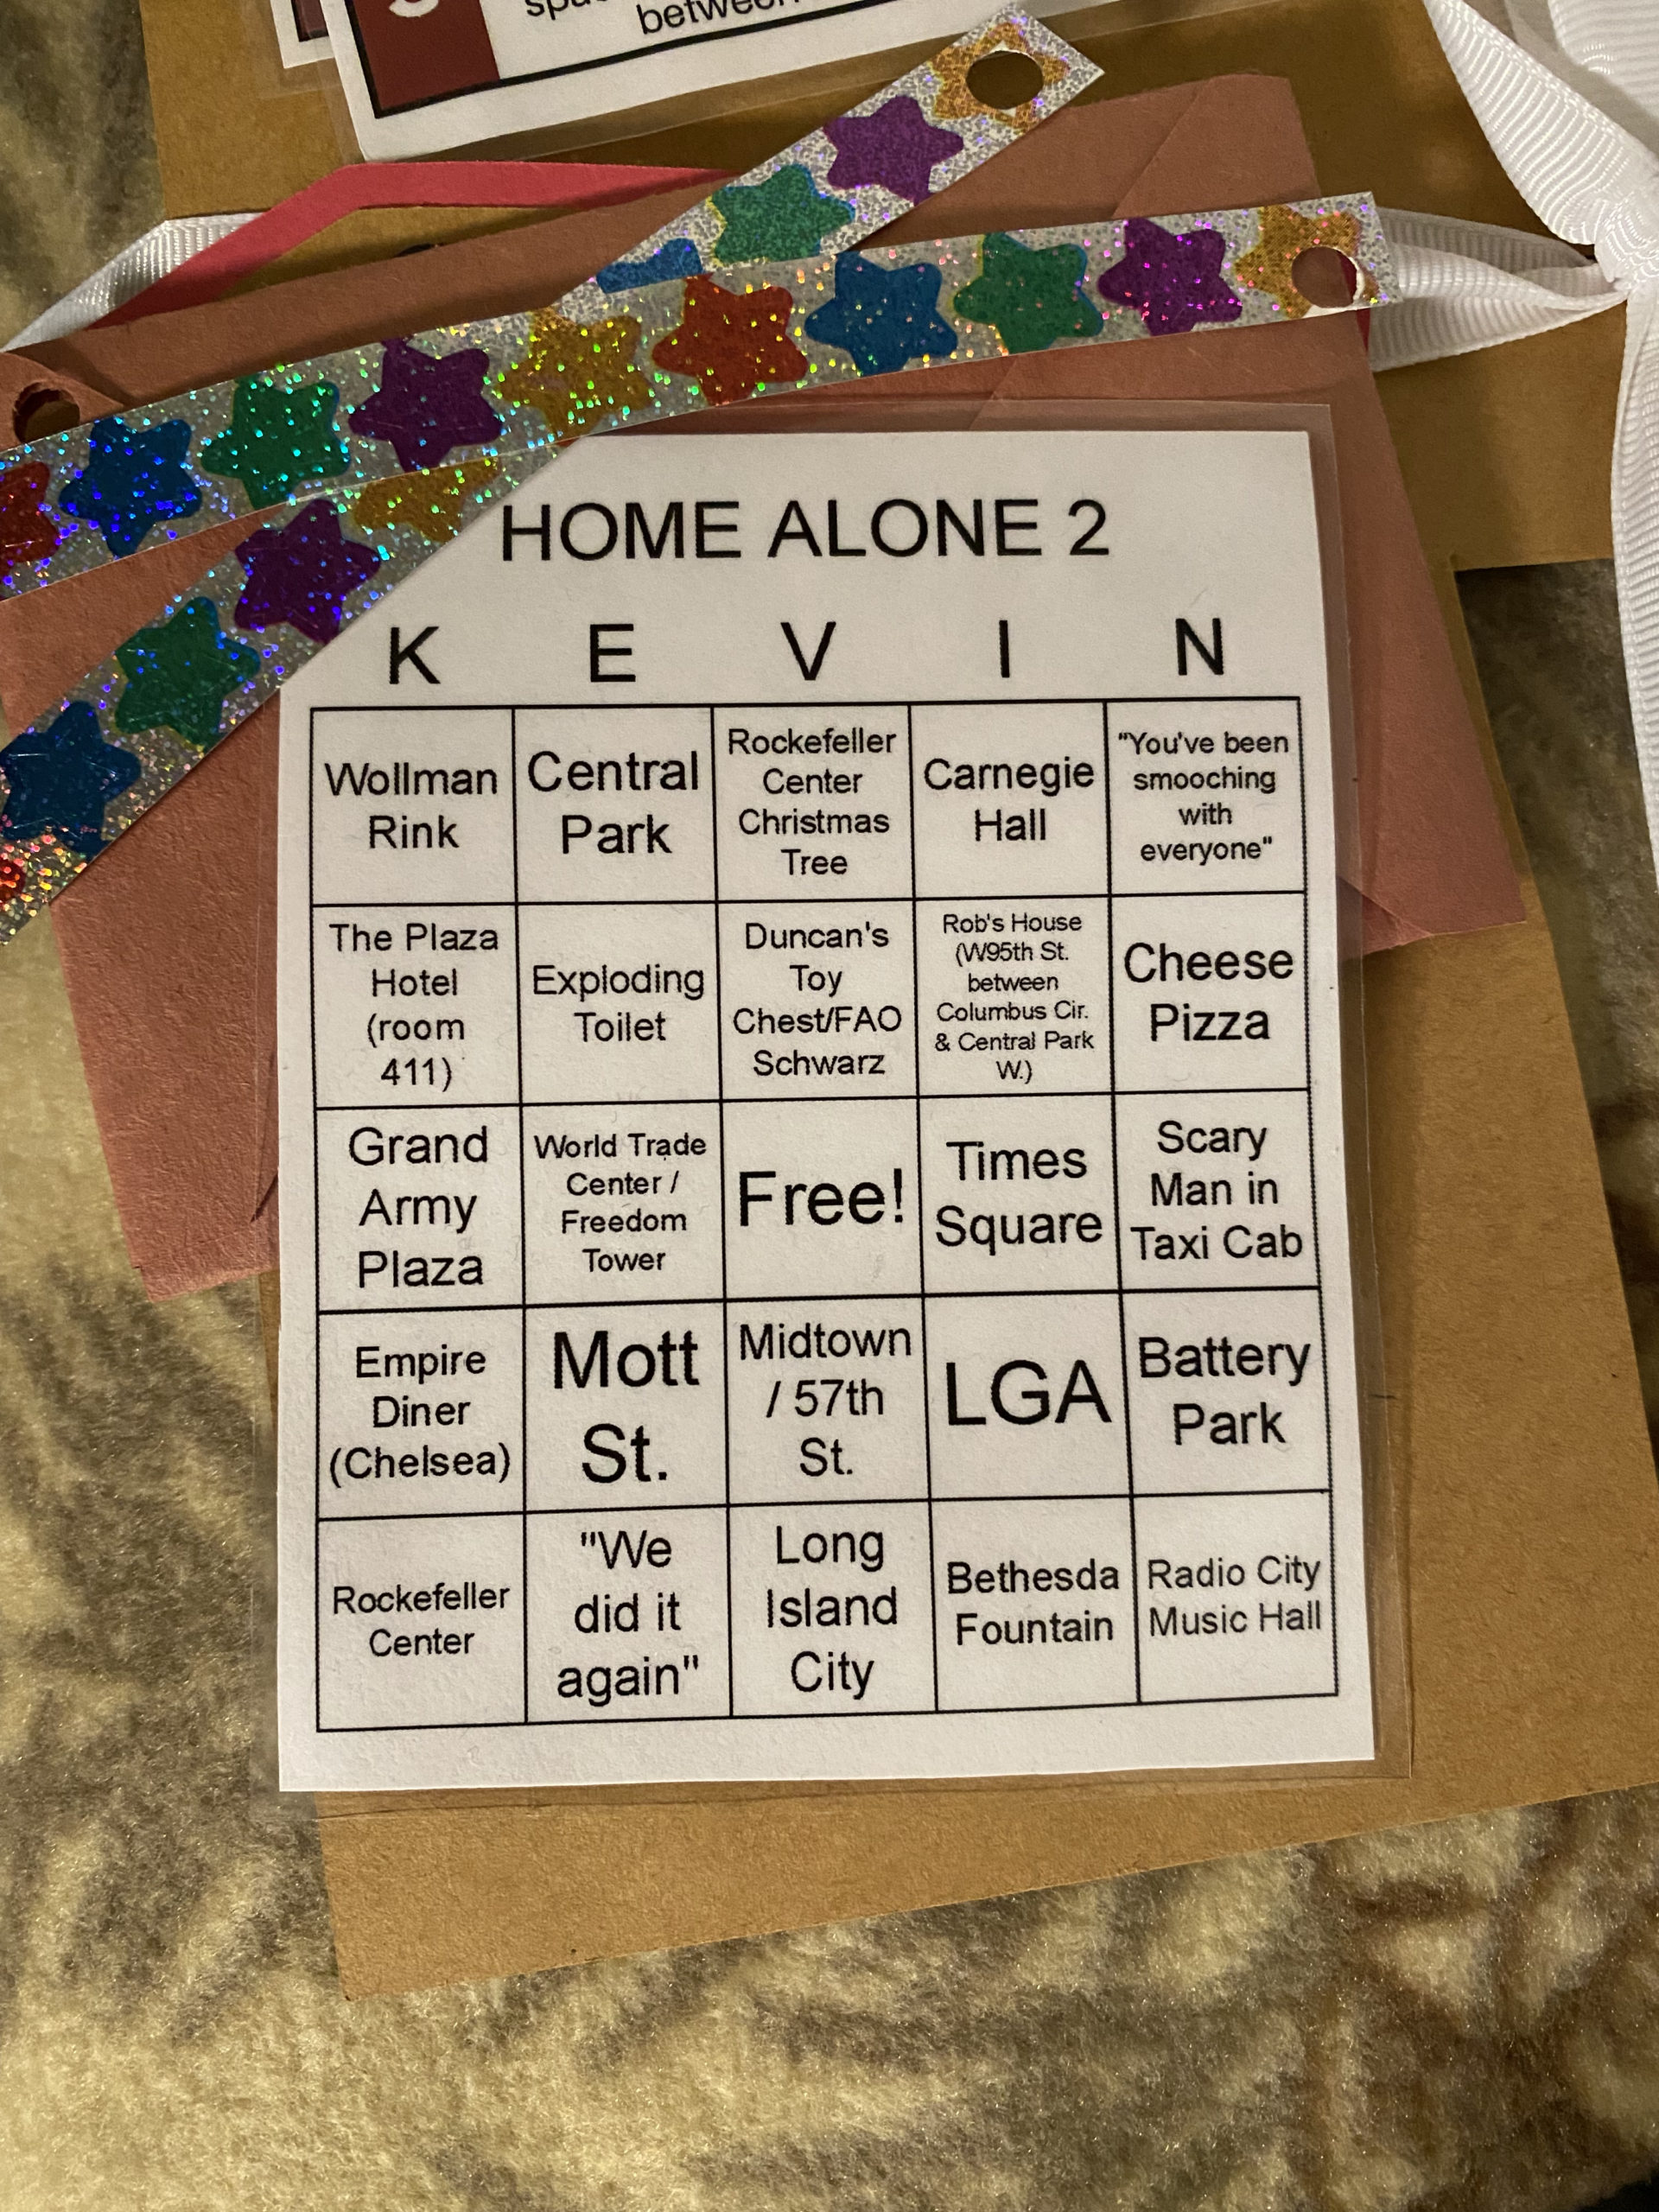 A bingo sheet for the movie Home Alone.